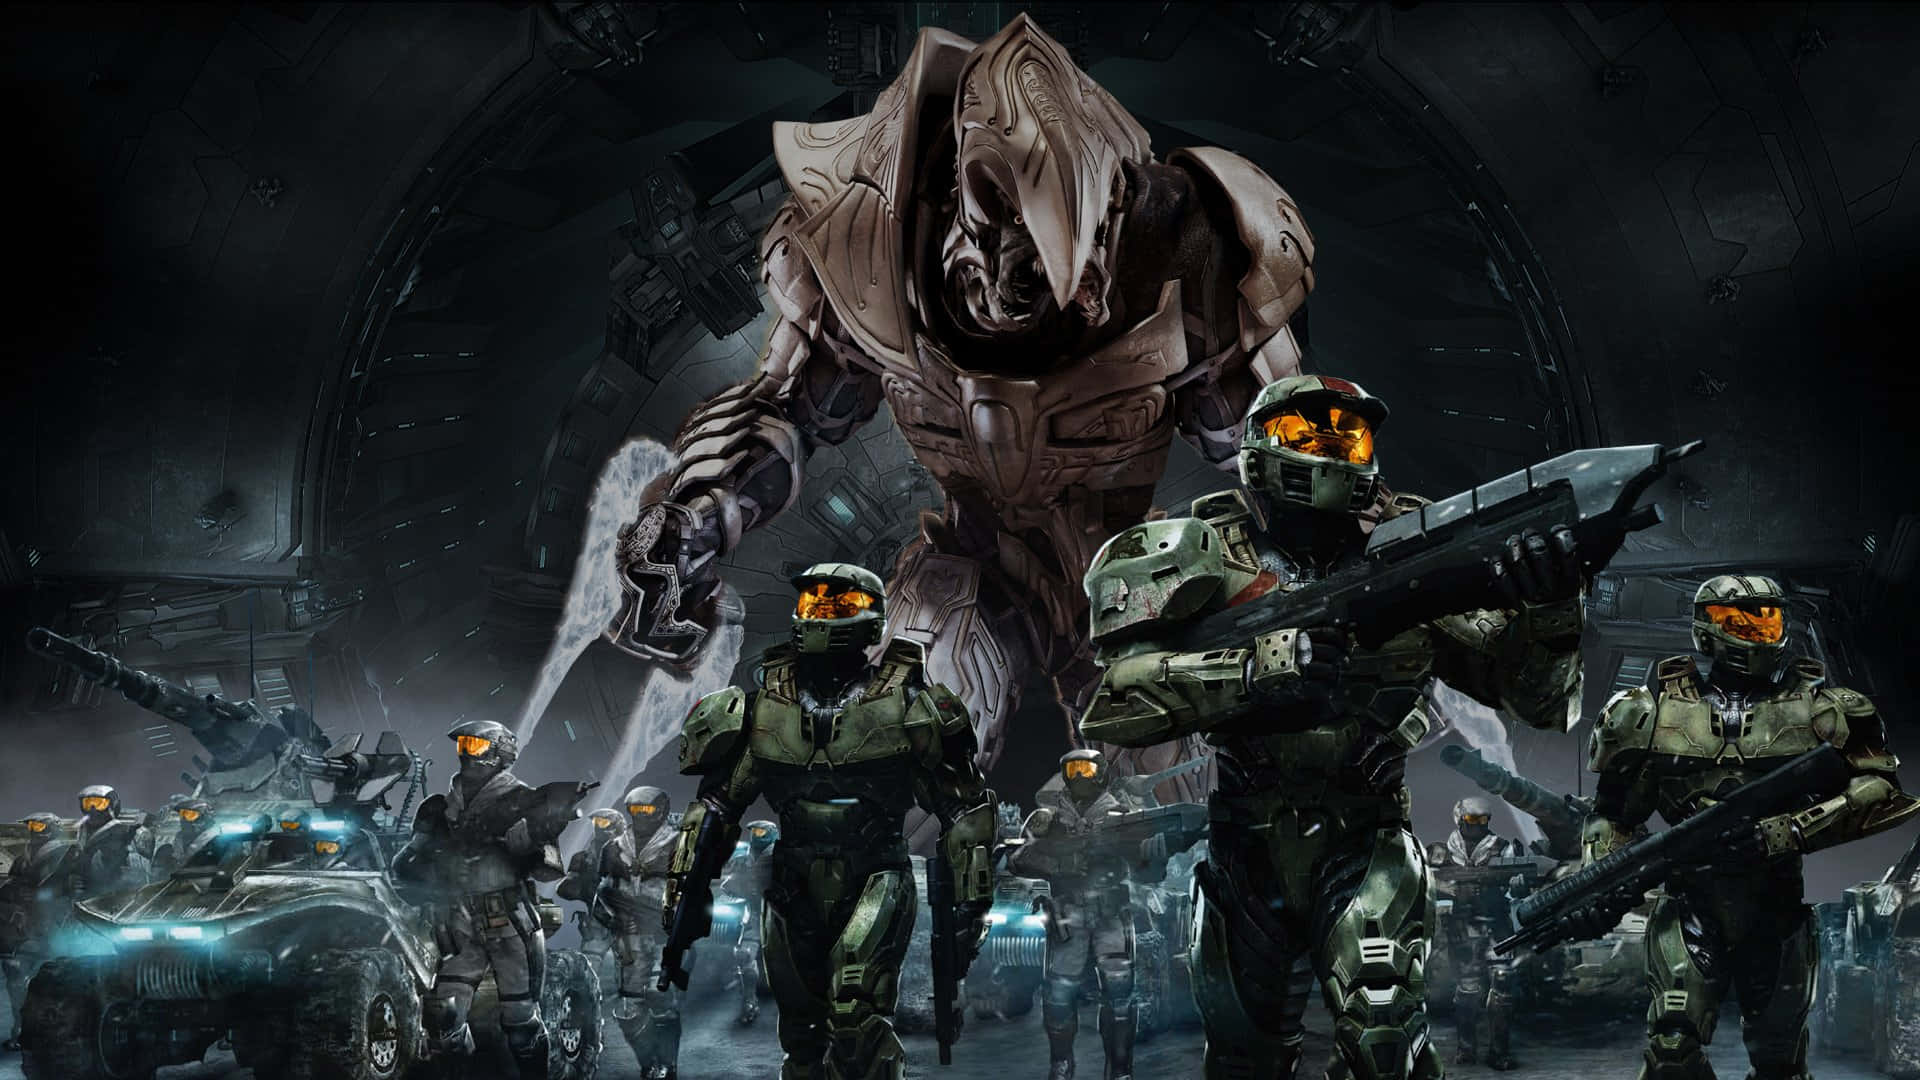 Cool Halo Soldiers With Giant Robot Wallpaper